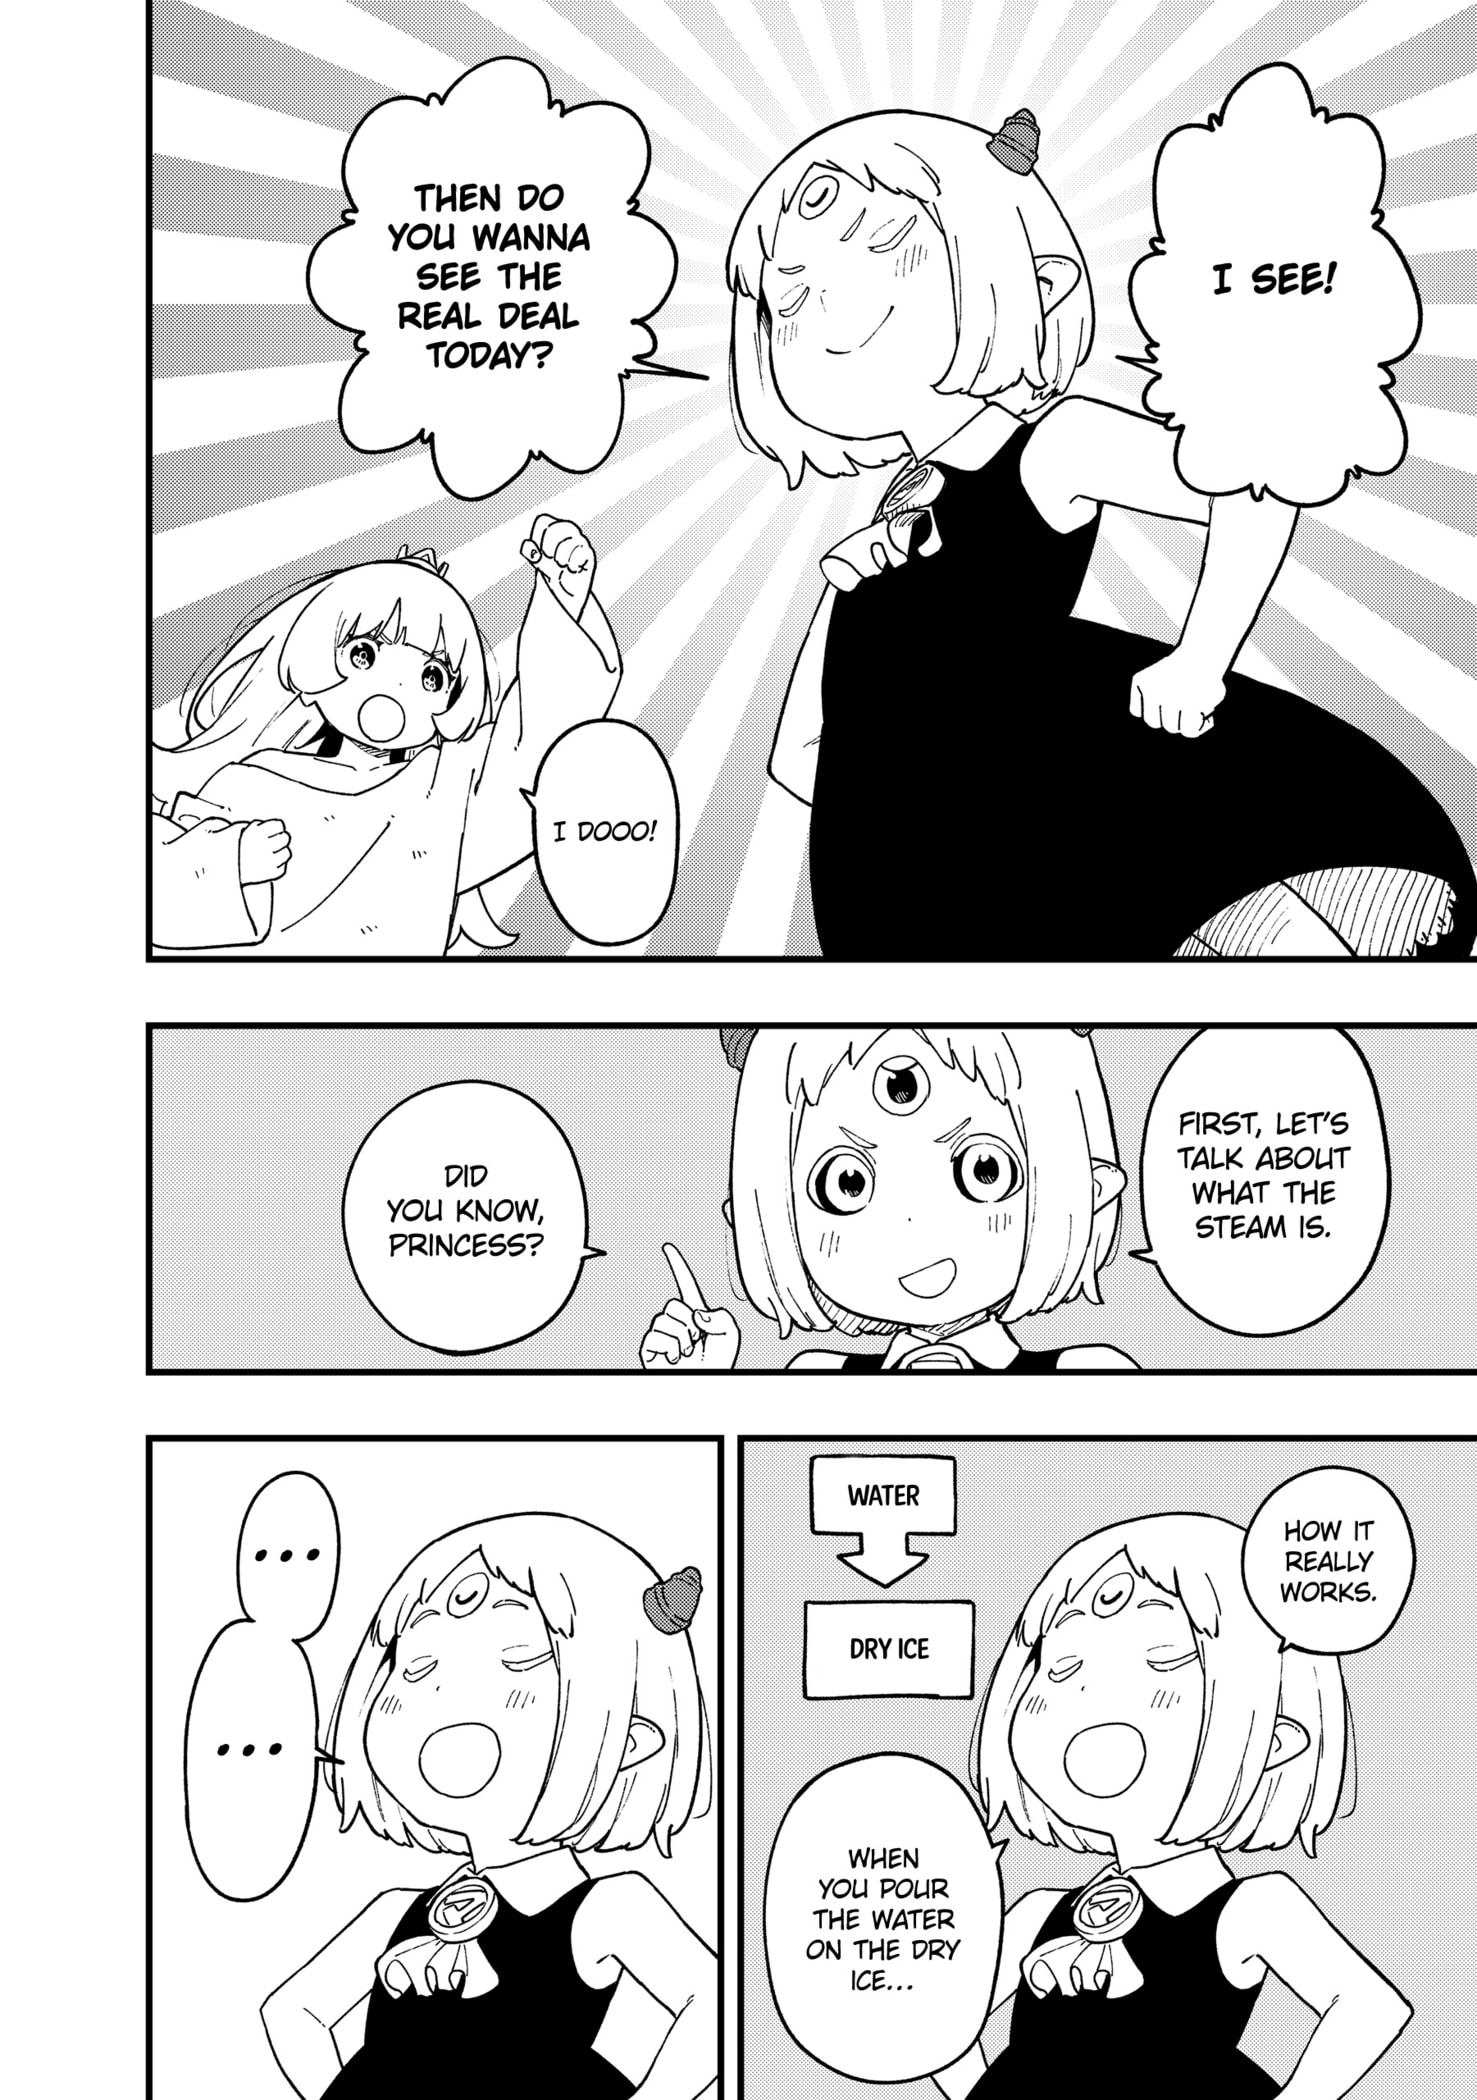 It's Time for "Interrogation", Princess! - chapter 233 - #6